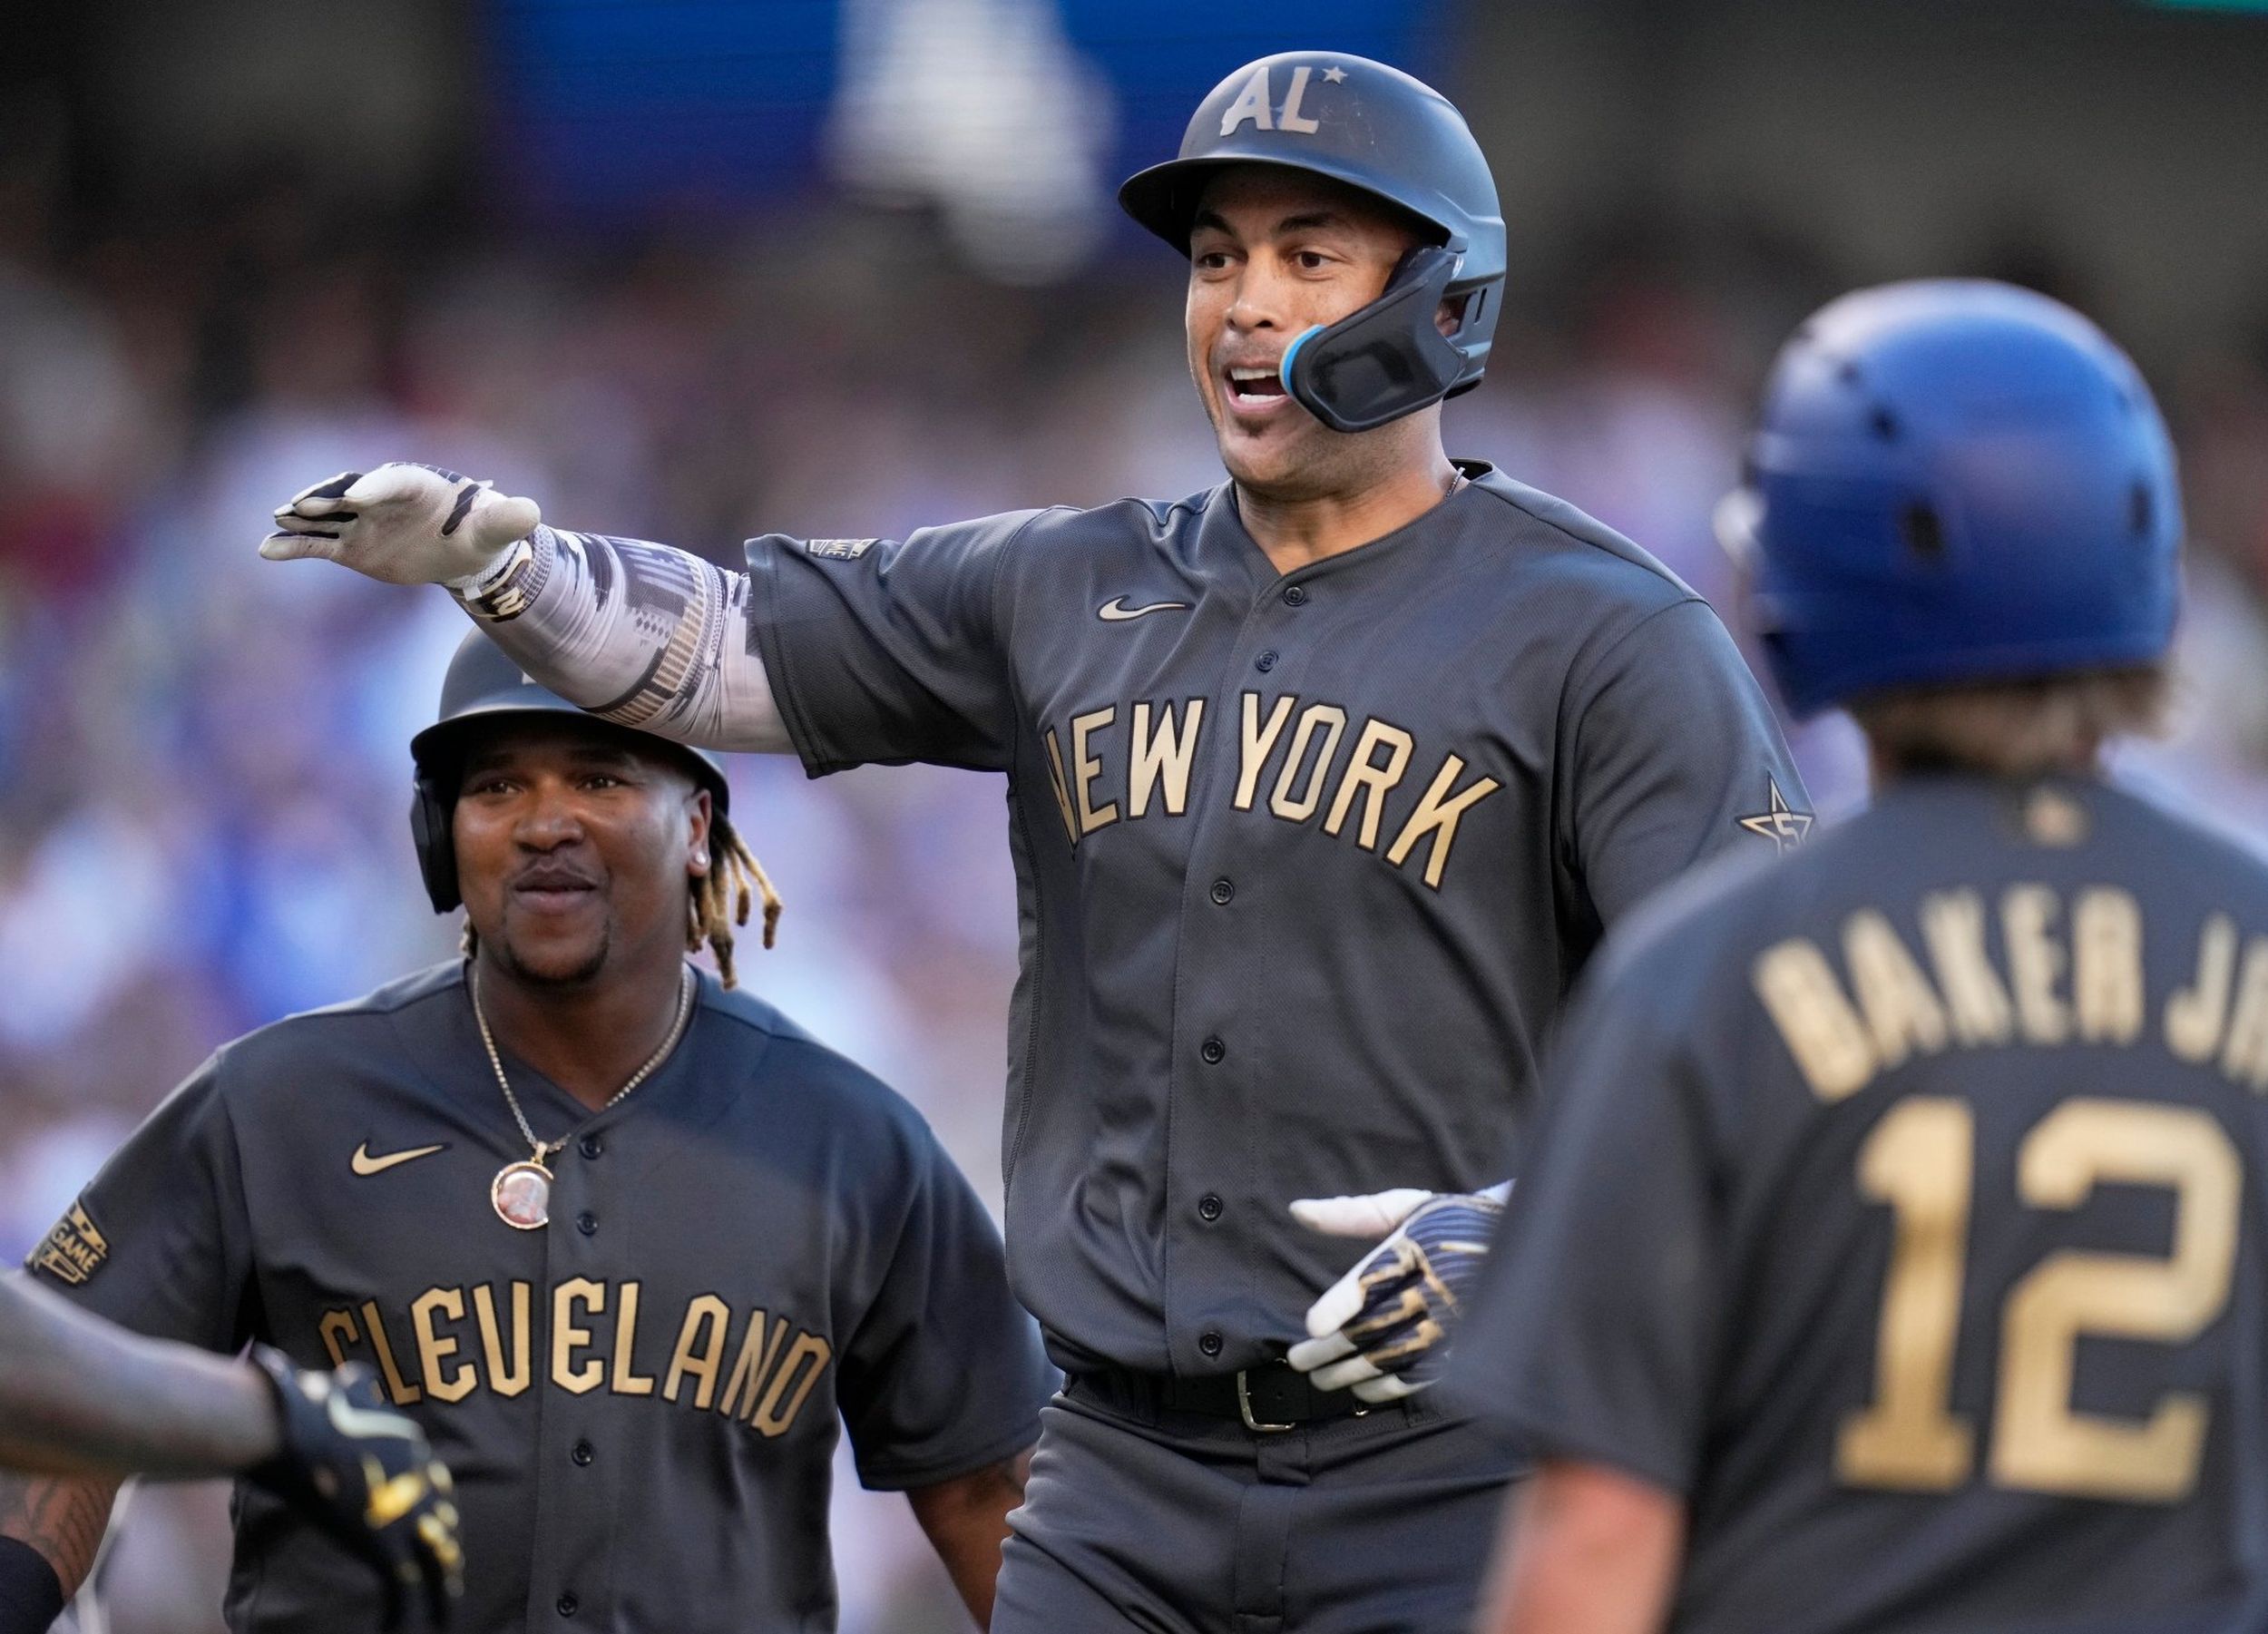 Stanton, Buxton lead AL over NL in 9th straight All-Star win - WTOP News